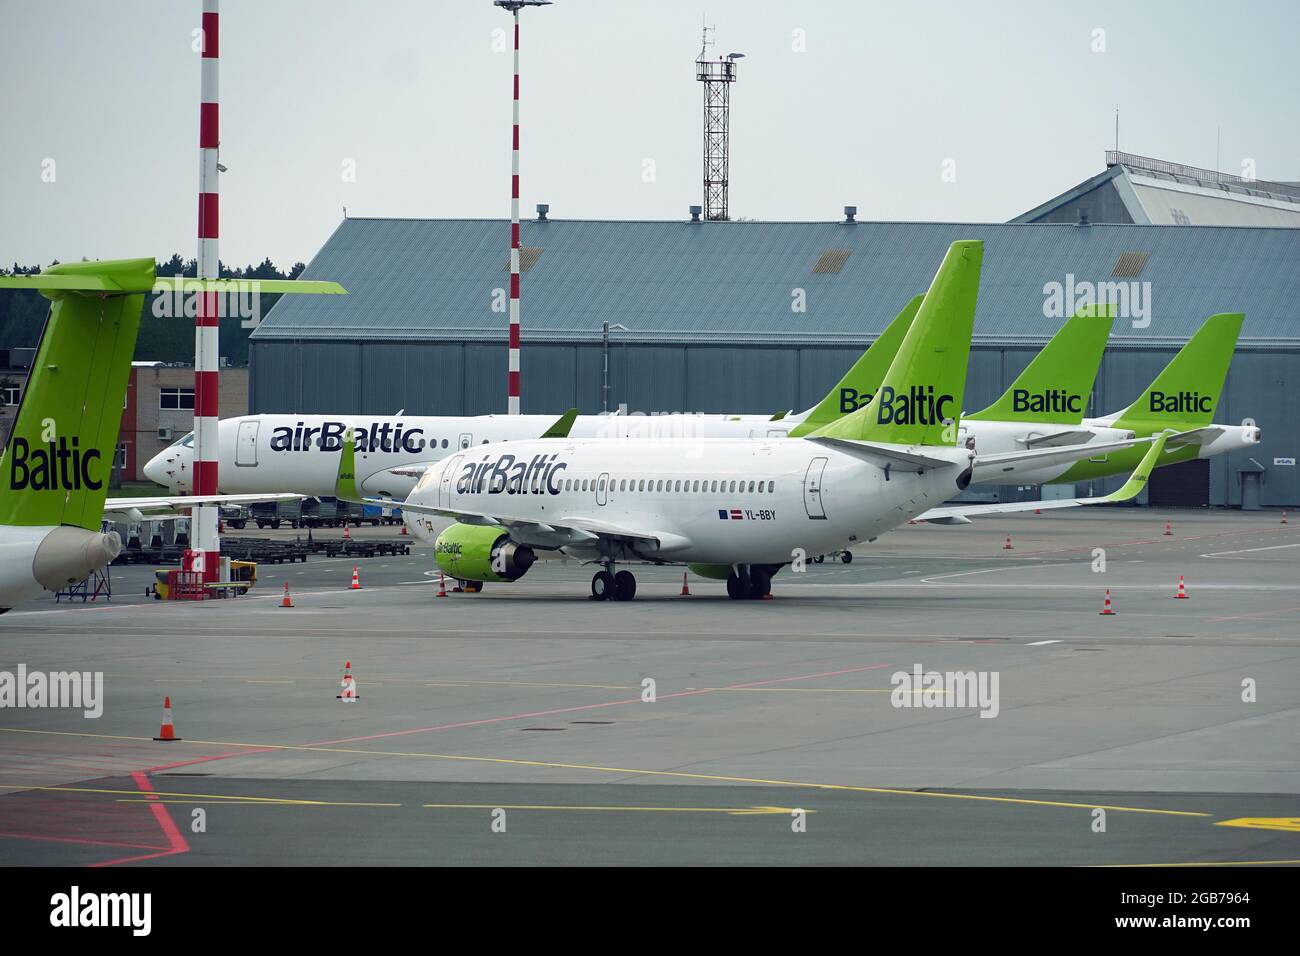 airBaltic (National airline of Latvia), airplane Stock Photo